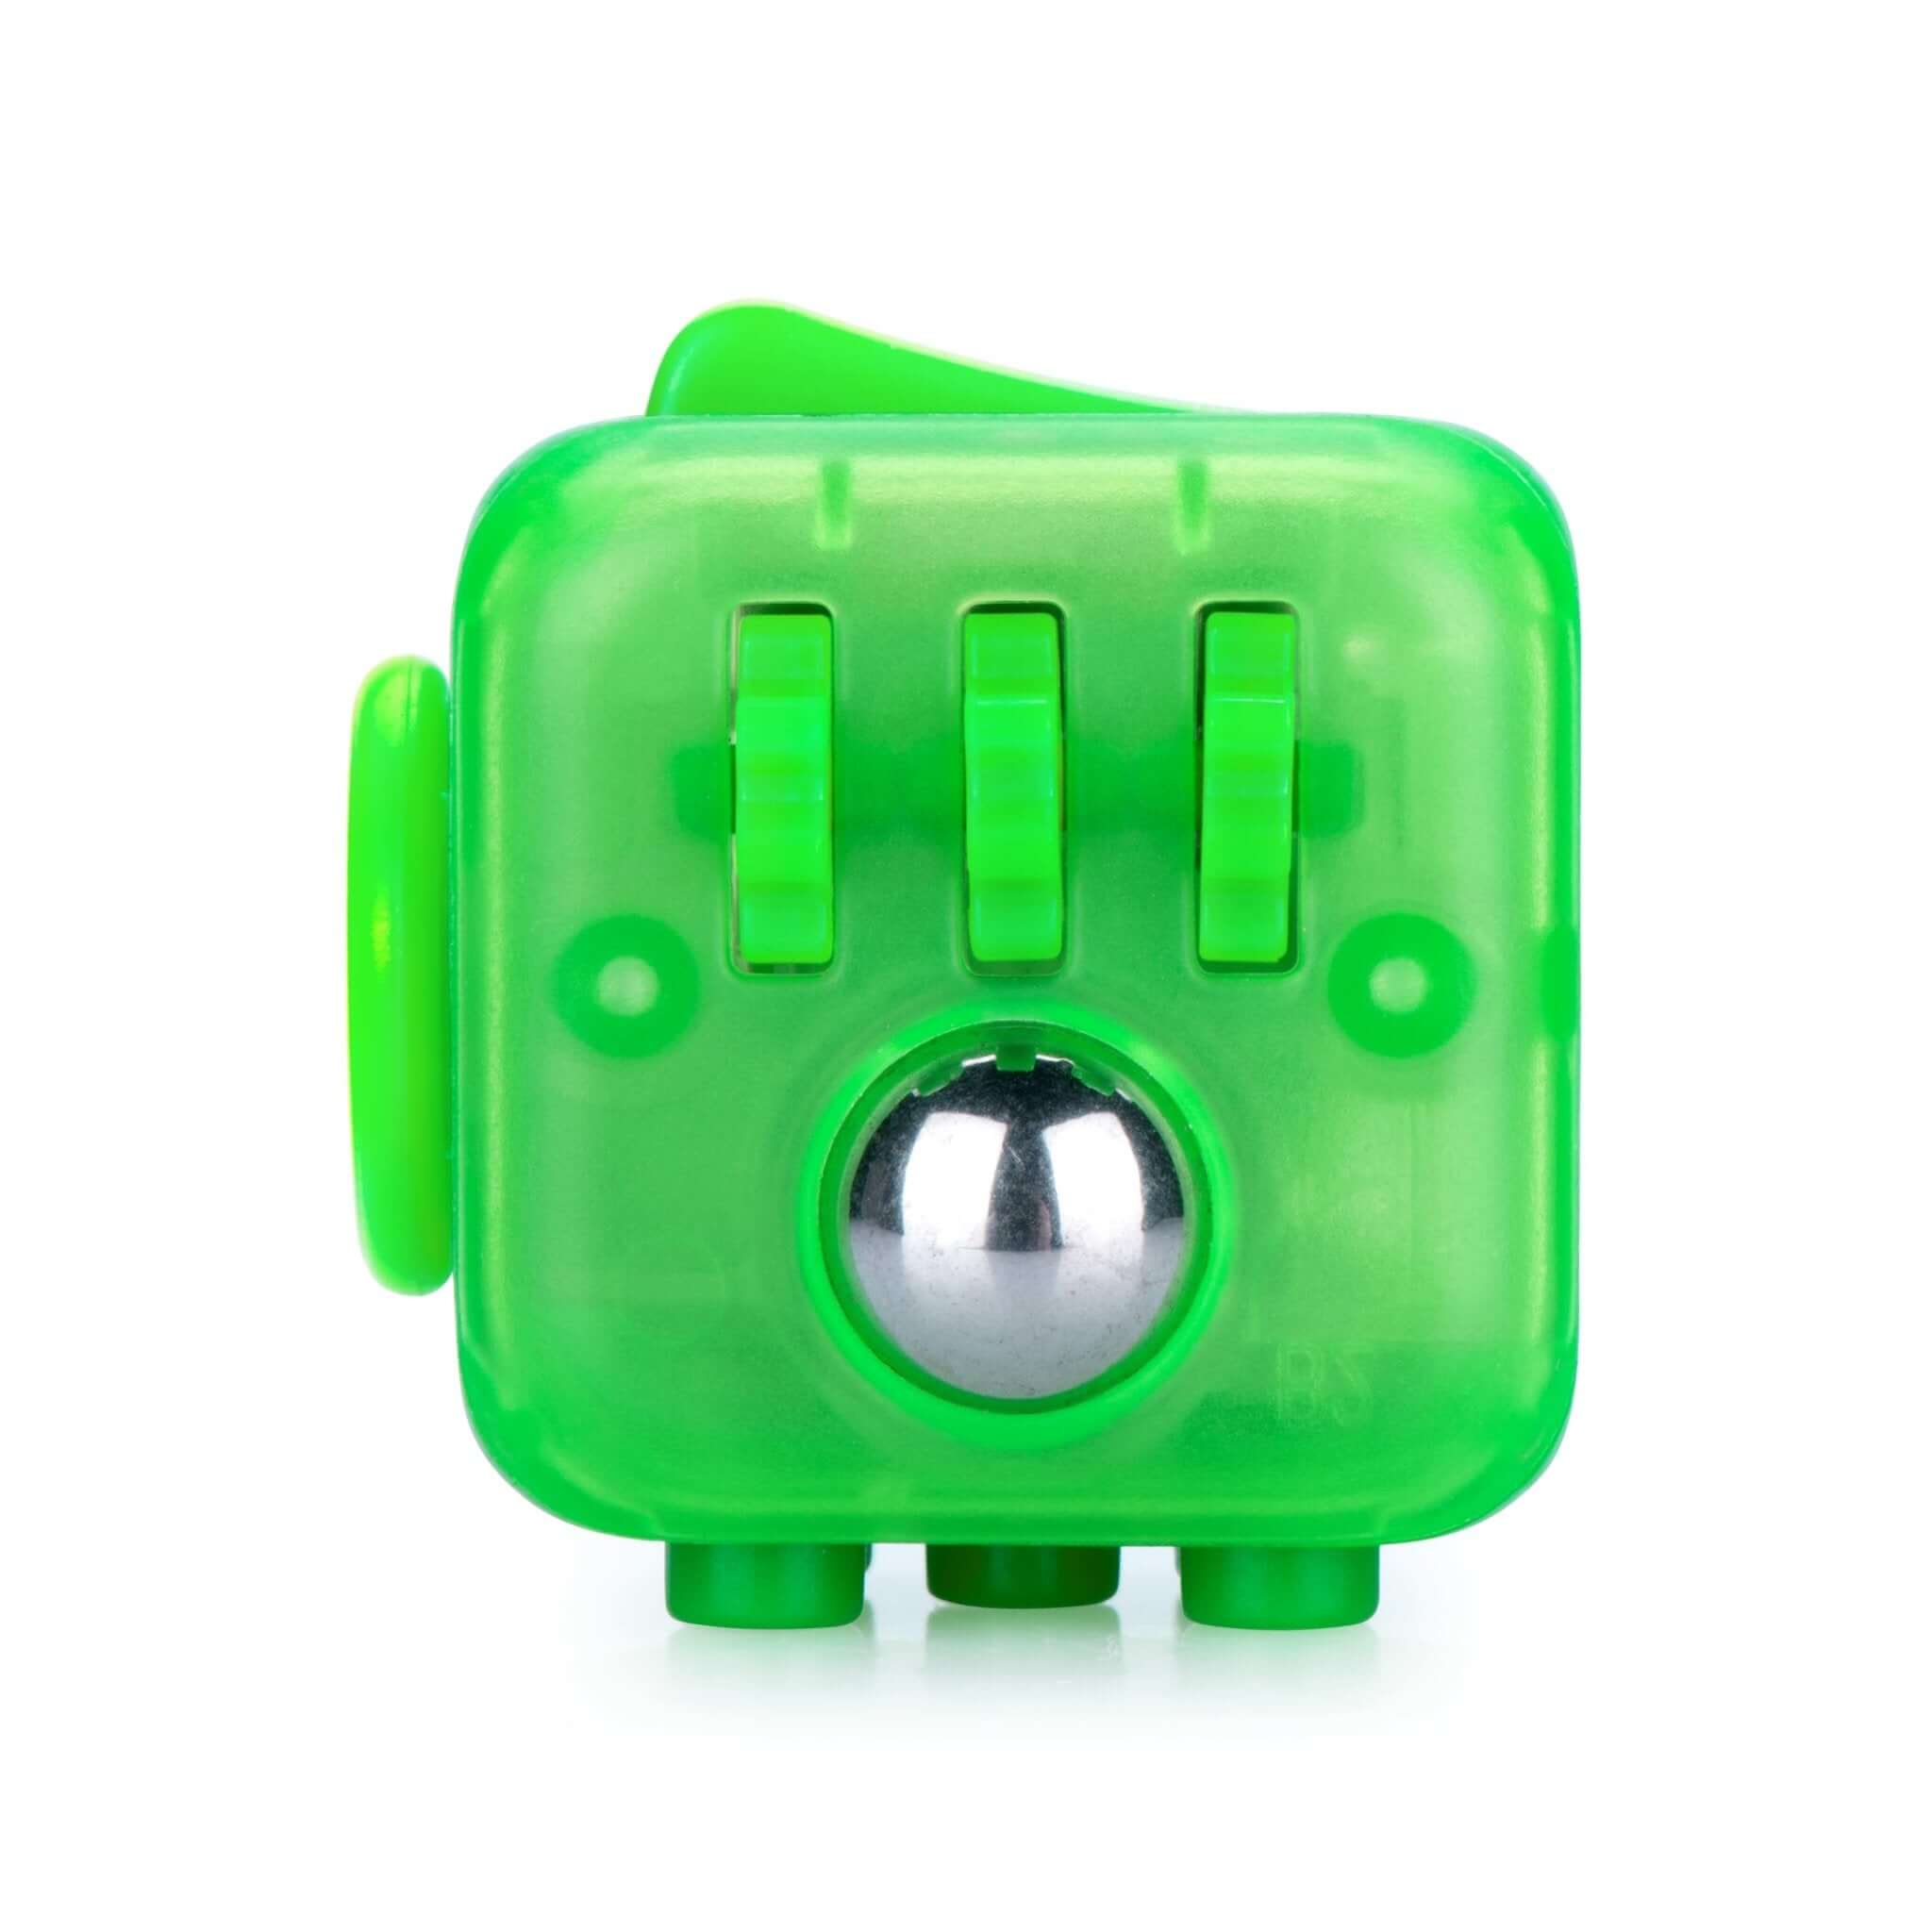 LAST CHANCE - LIMITED STOCK - Design Your Own Fidget Cube Block - Hand